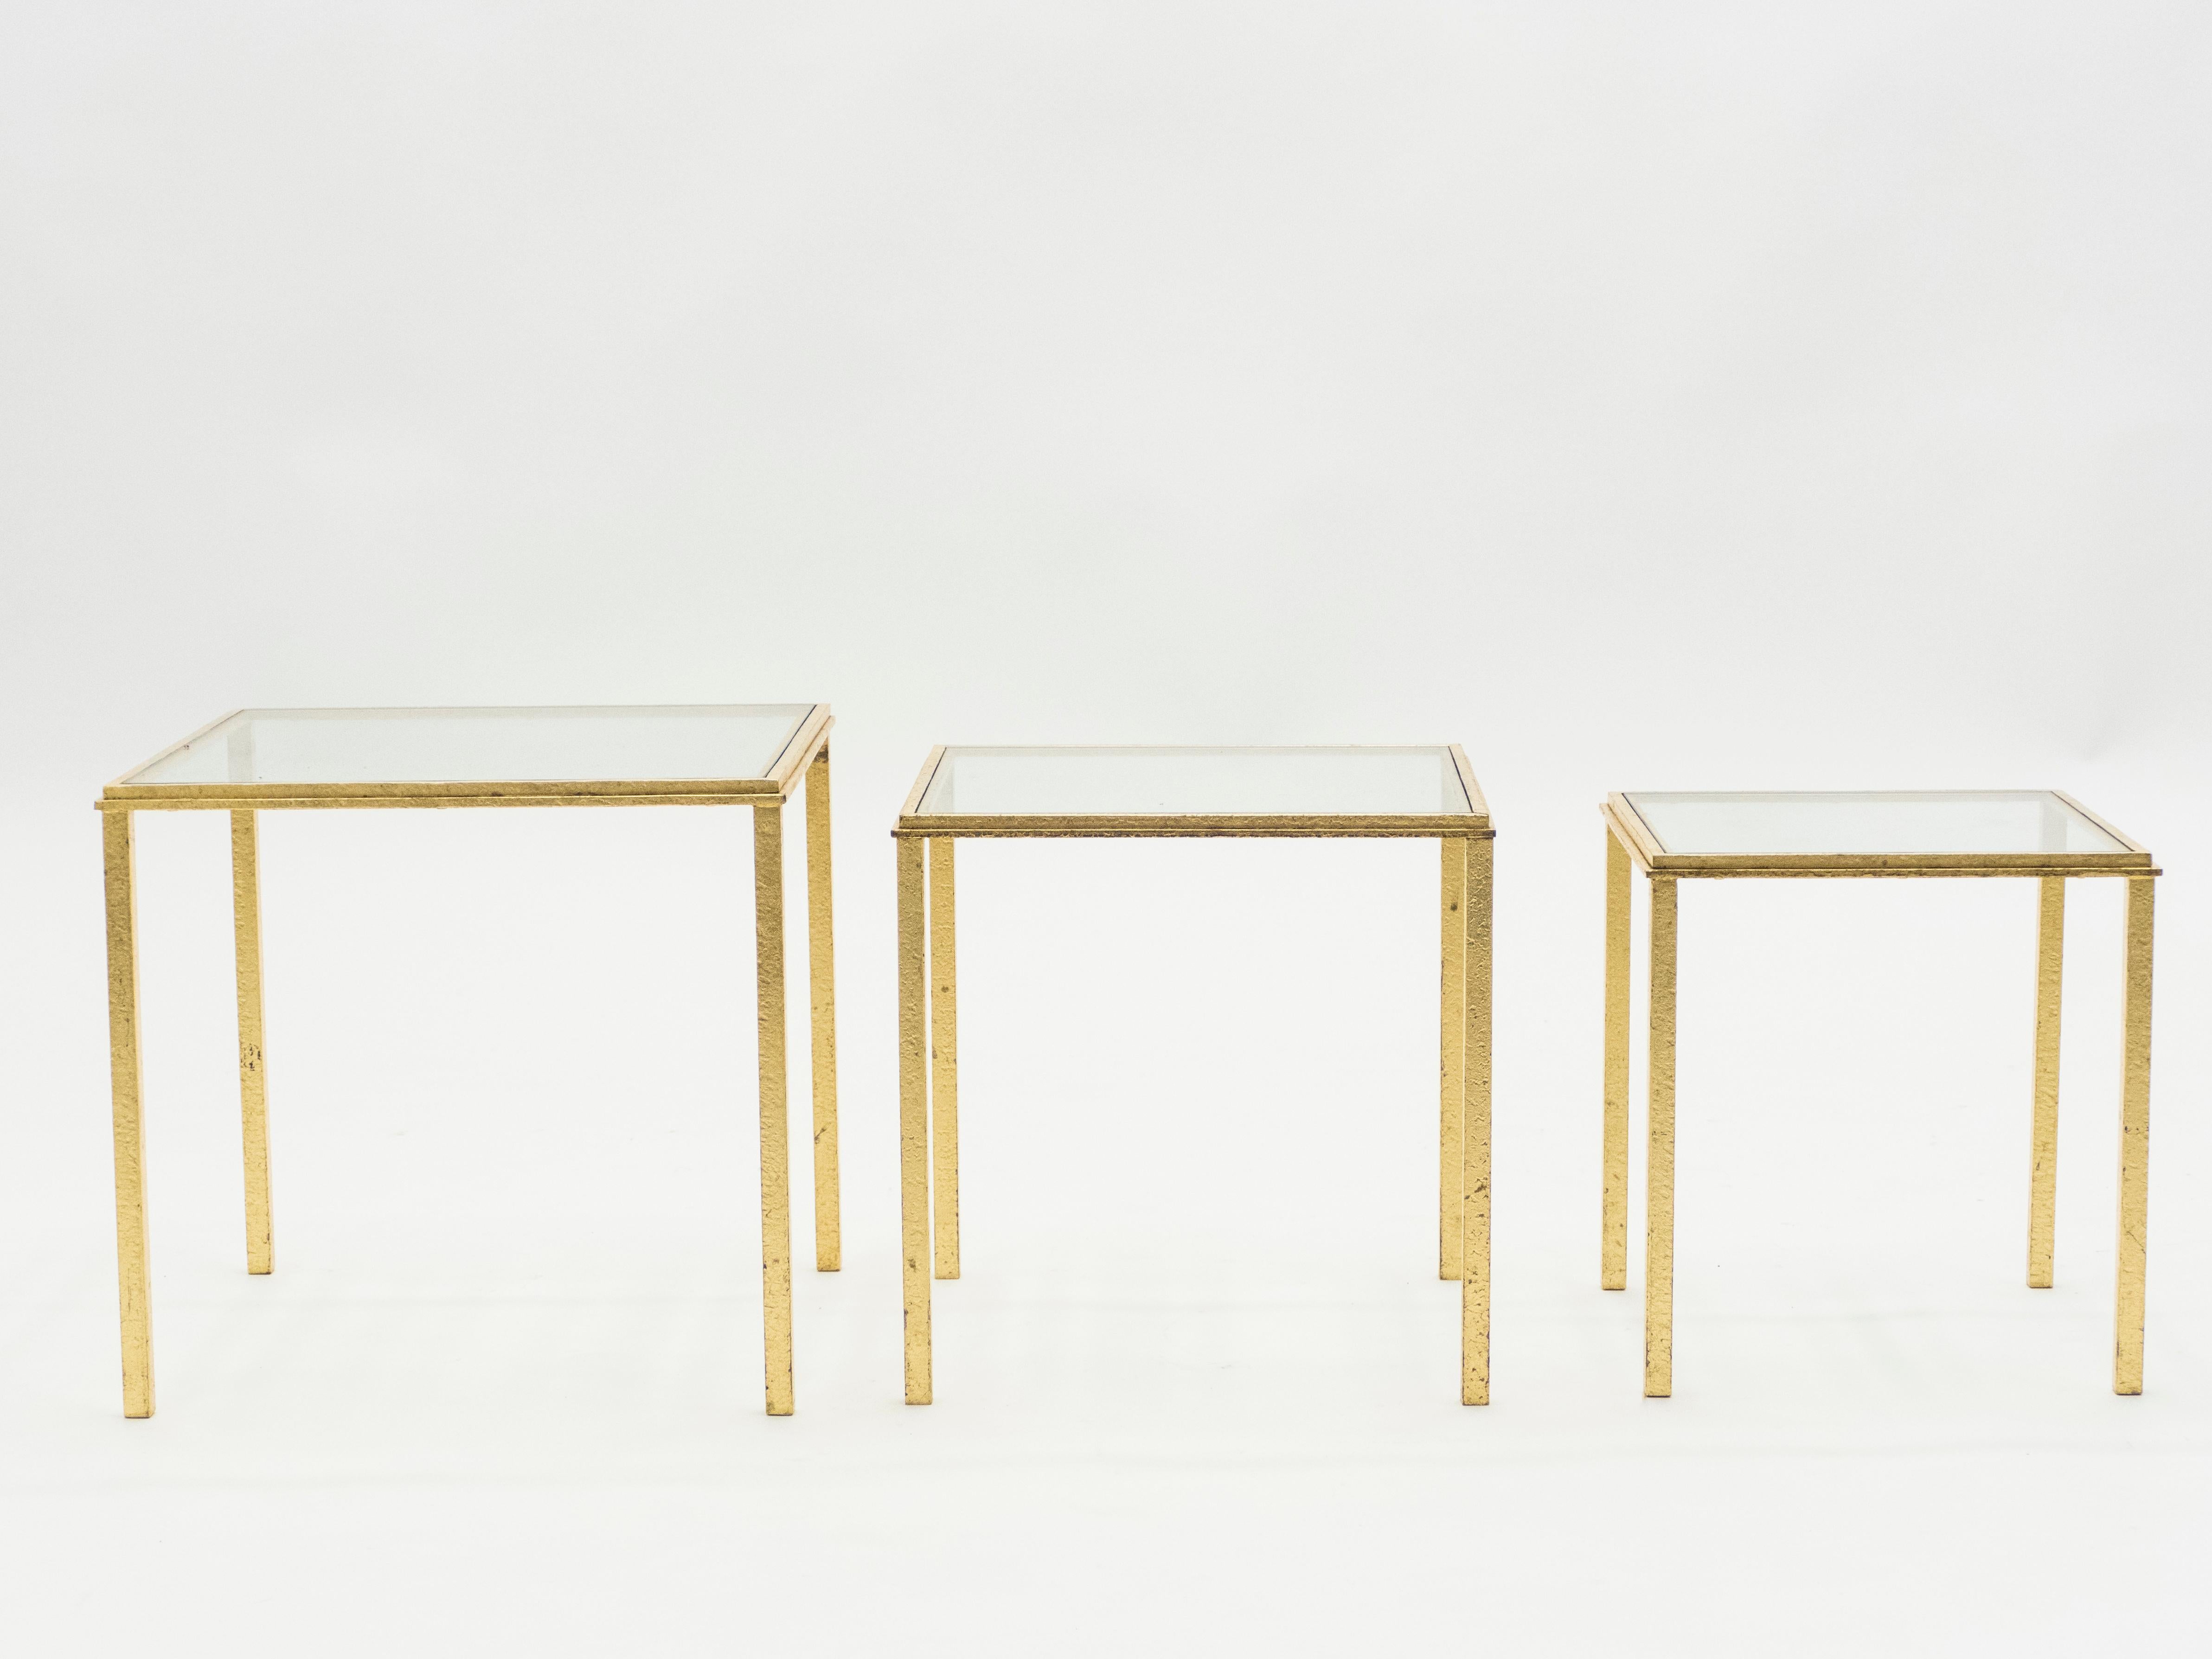 Midcentury Roger Thibier Gilt Wrought Iron Gold Leaf Nesting Tables, 1960s For Sale 3